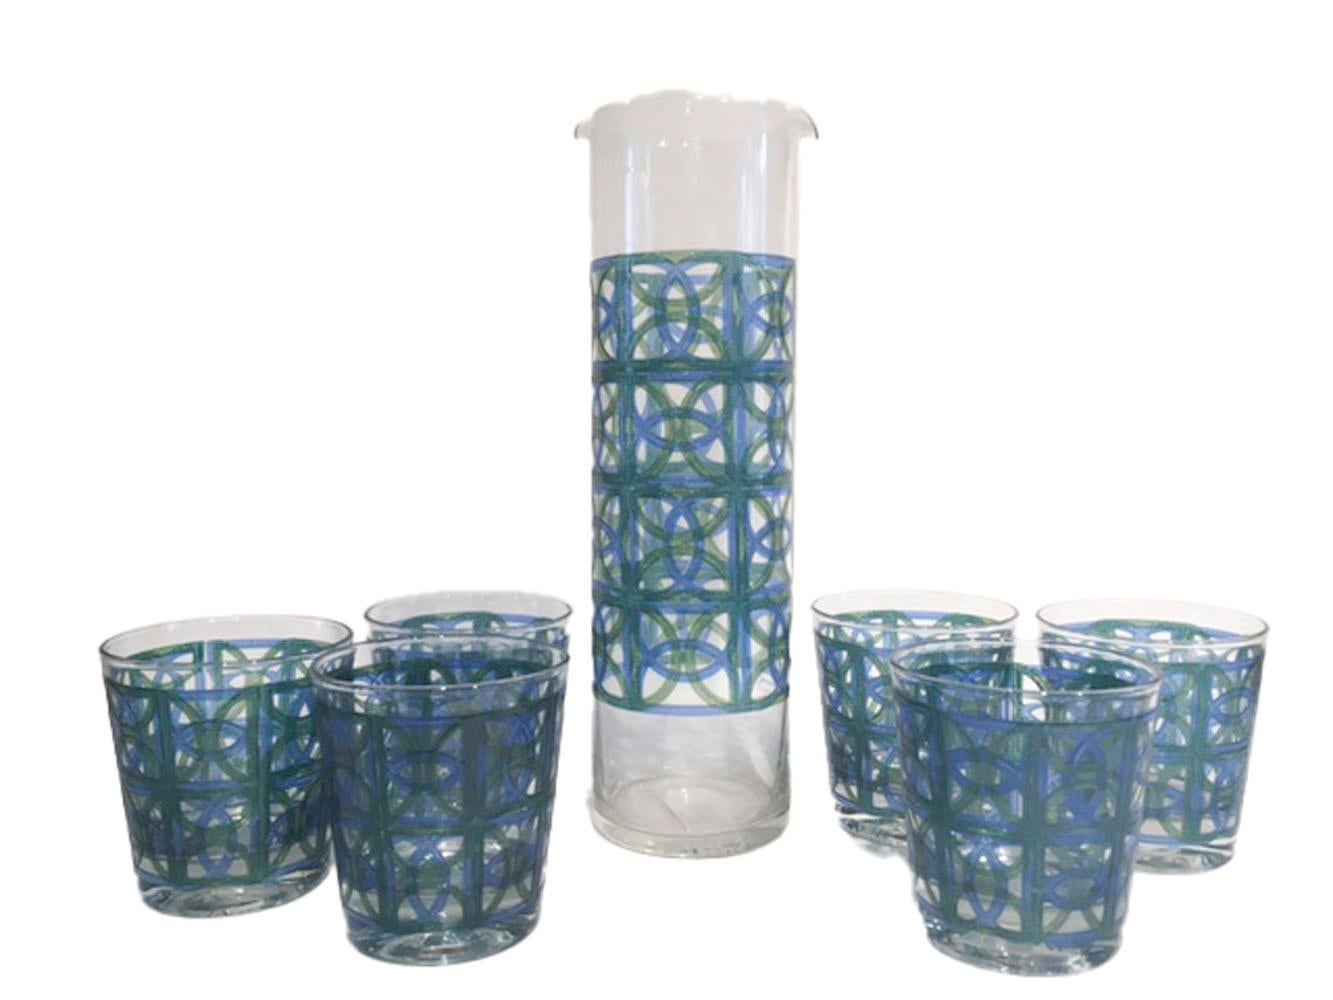 Mid-20th century cocktail set designed by Irene Pasinski for Washington Glass Co. West Virginia. Consisting of a double spouted cylindrical cocktail pitcher and six old fashioned glasses, all decorated with a geometric design in translucent blue and